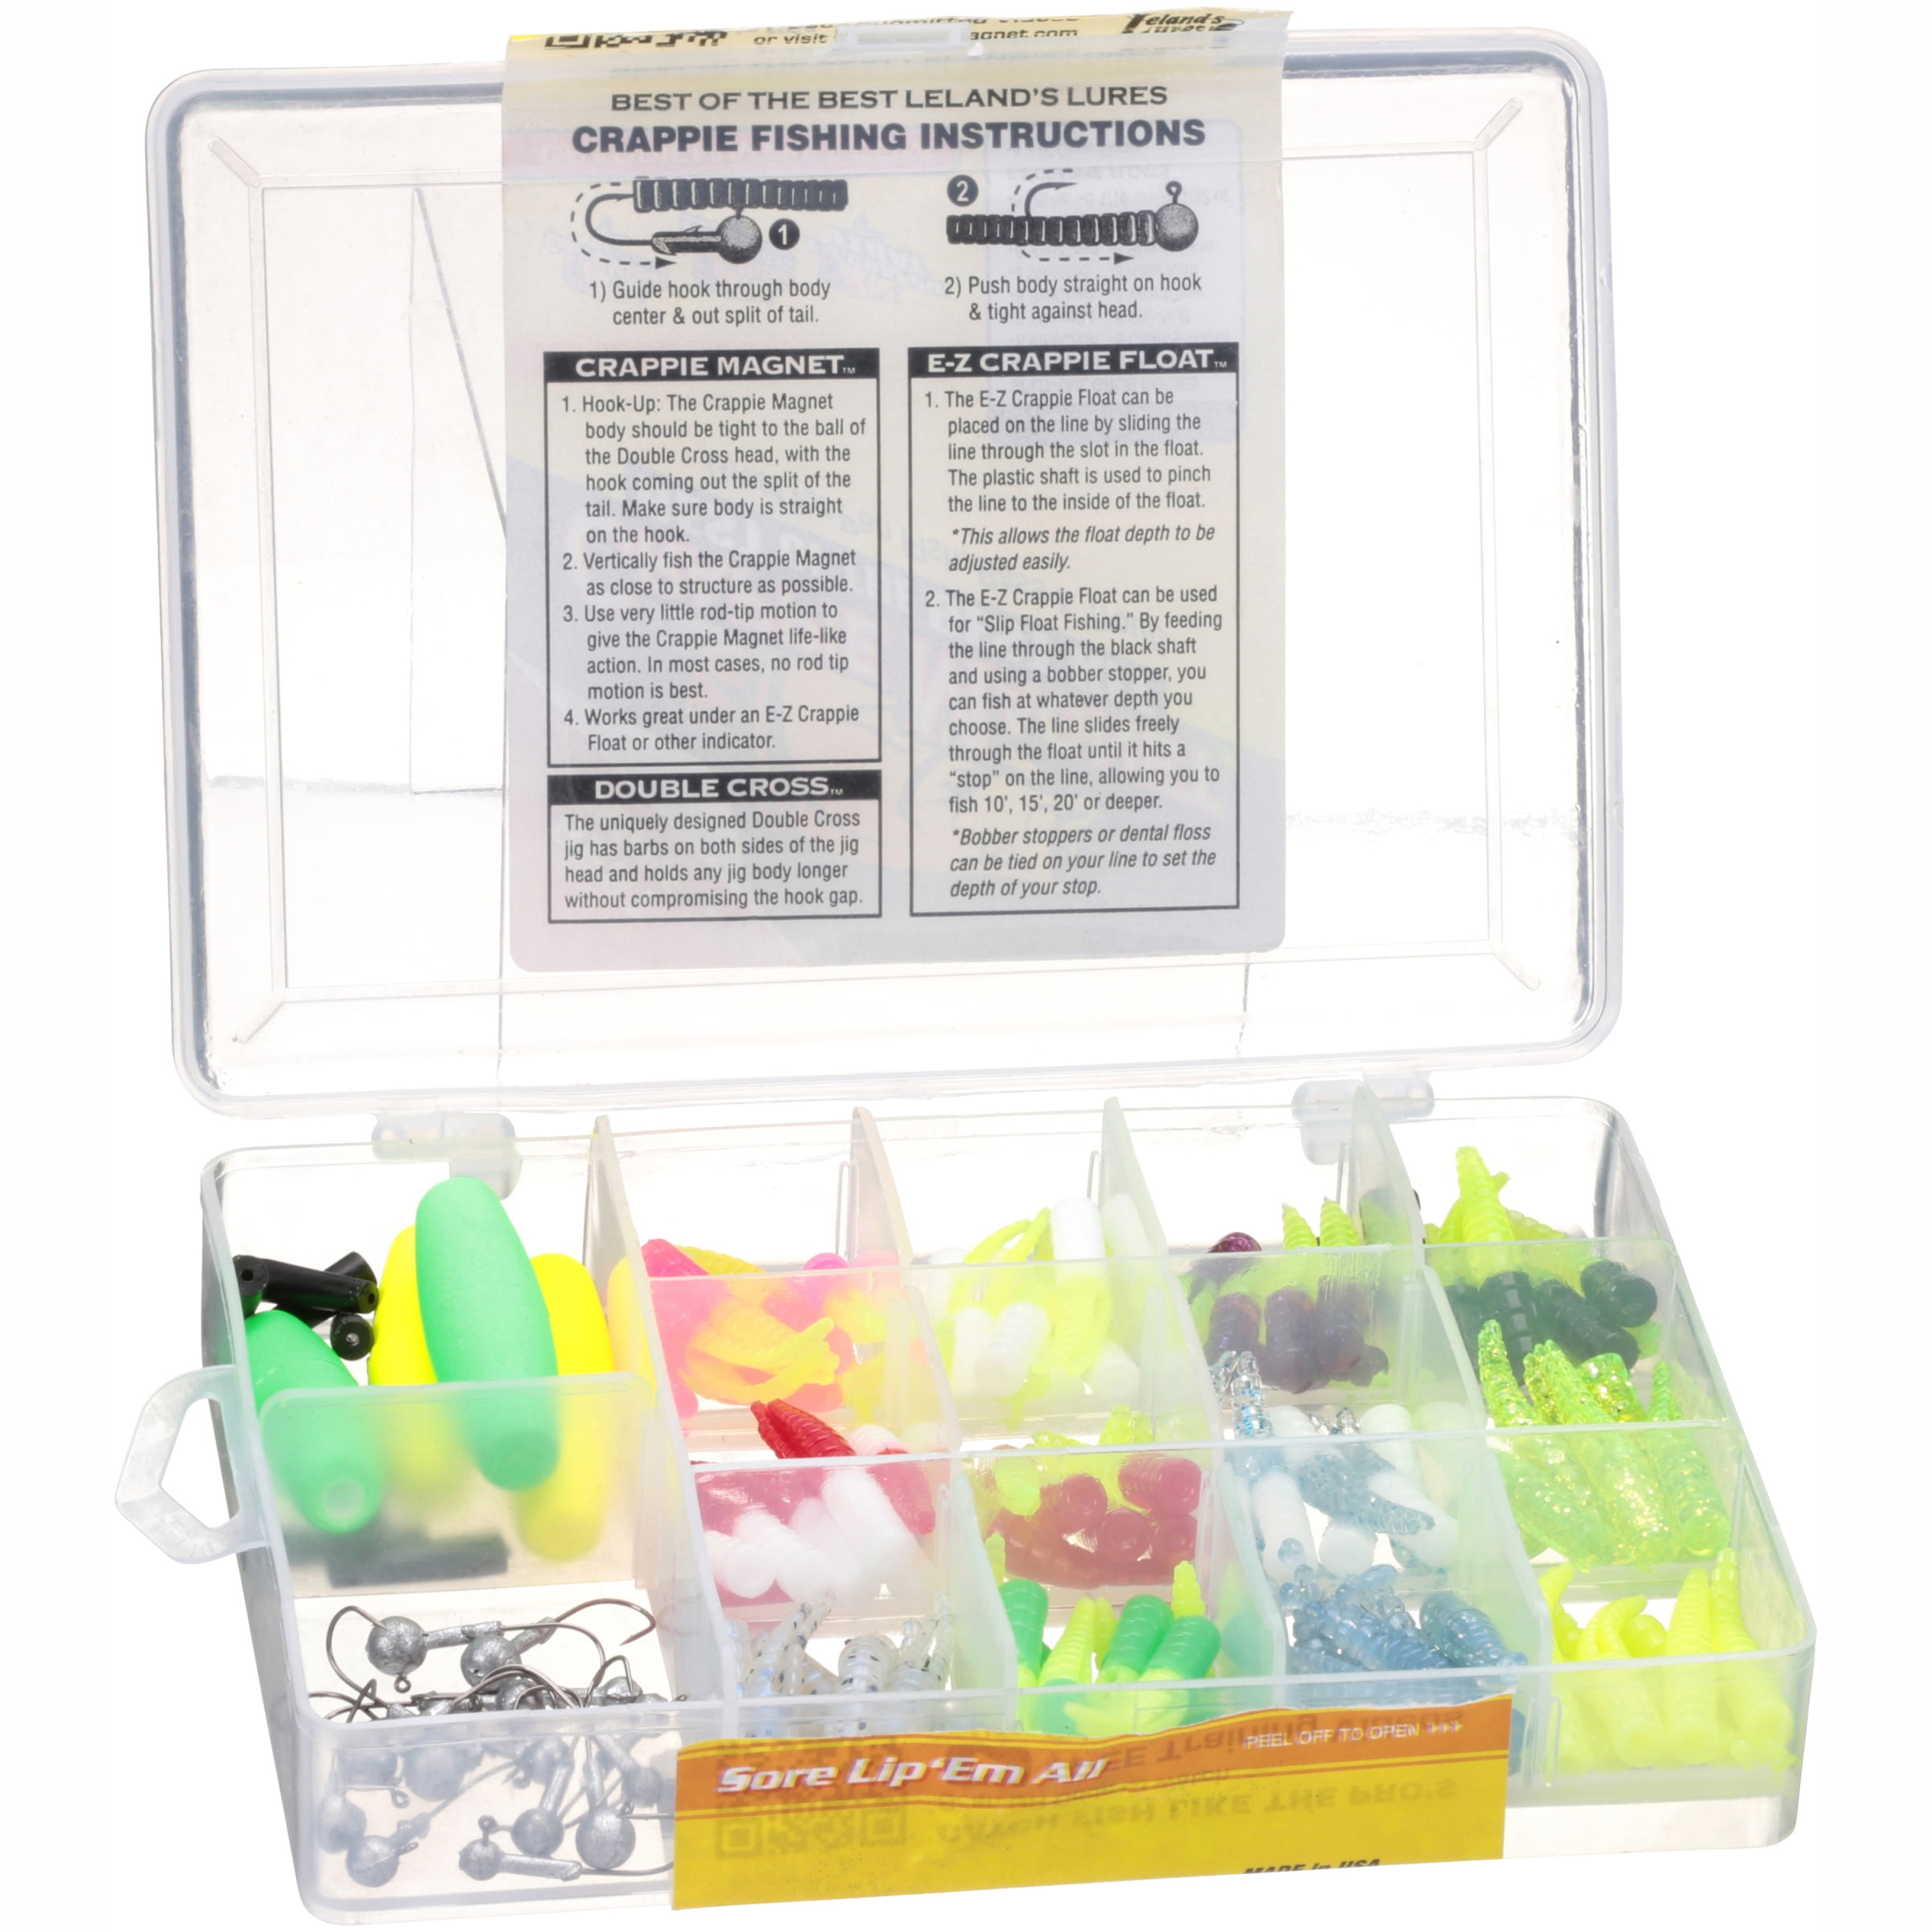 Leland Lures Crappie Magnets 2 packs 30 pc total green assassin 